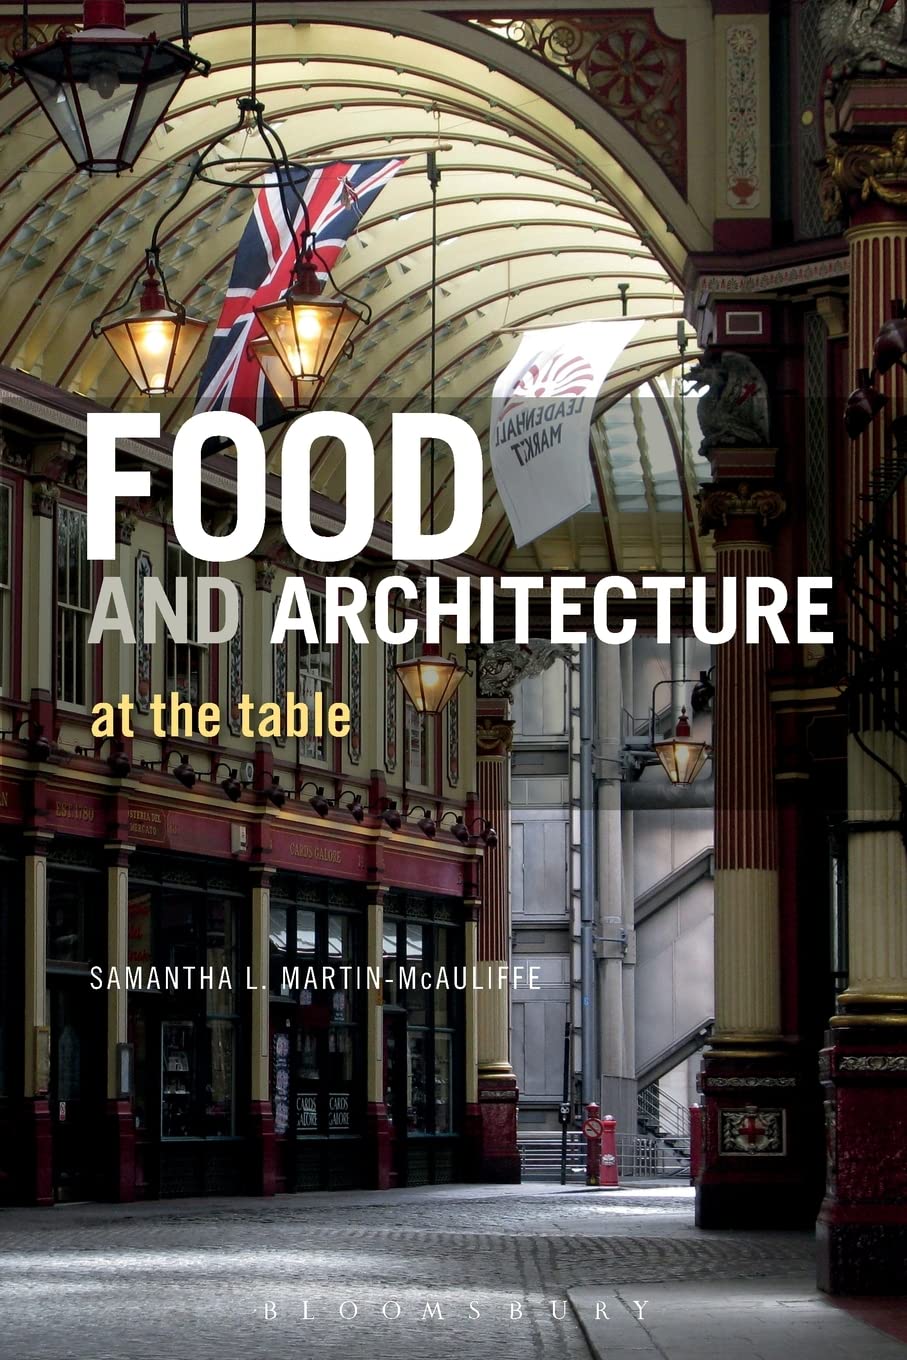 Food and architecture at the table